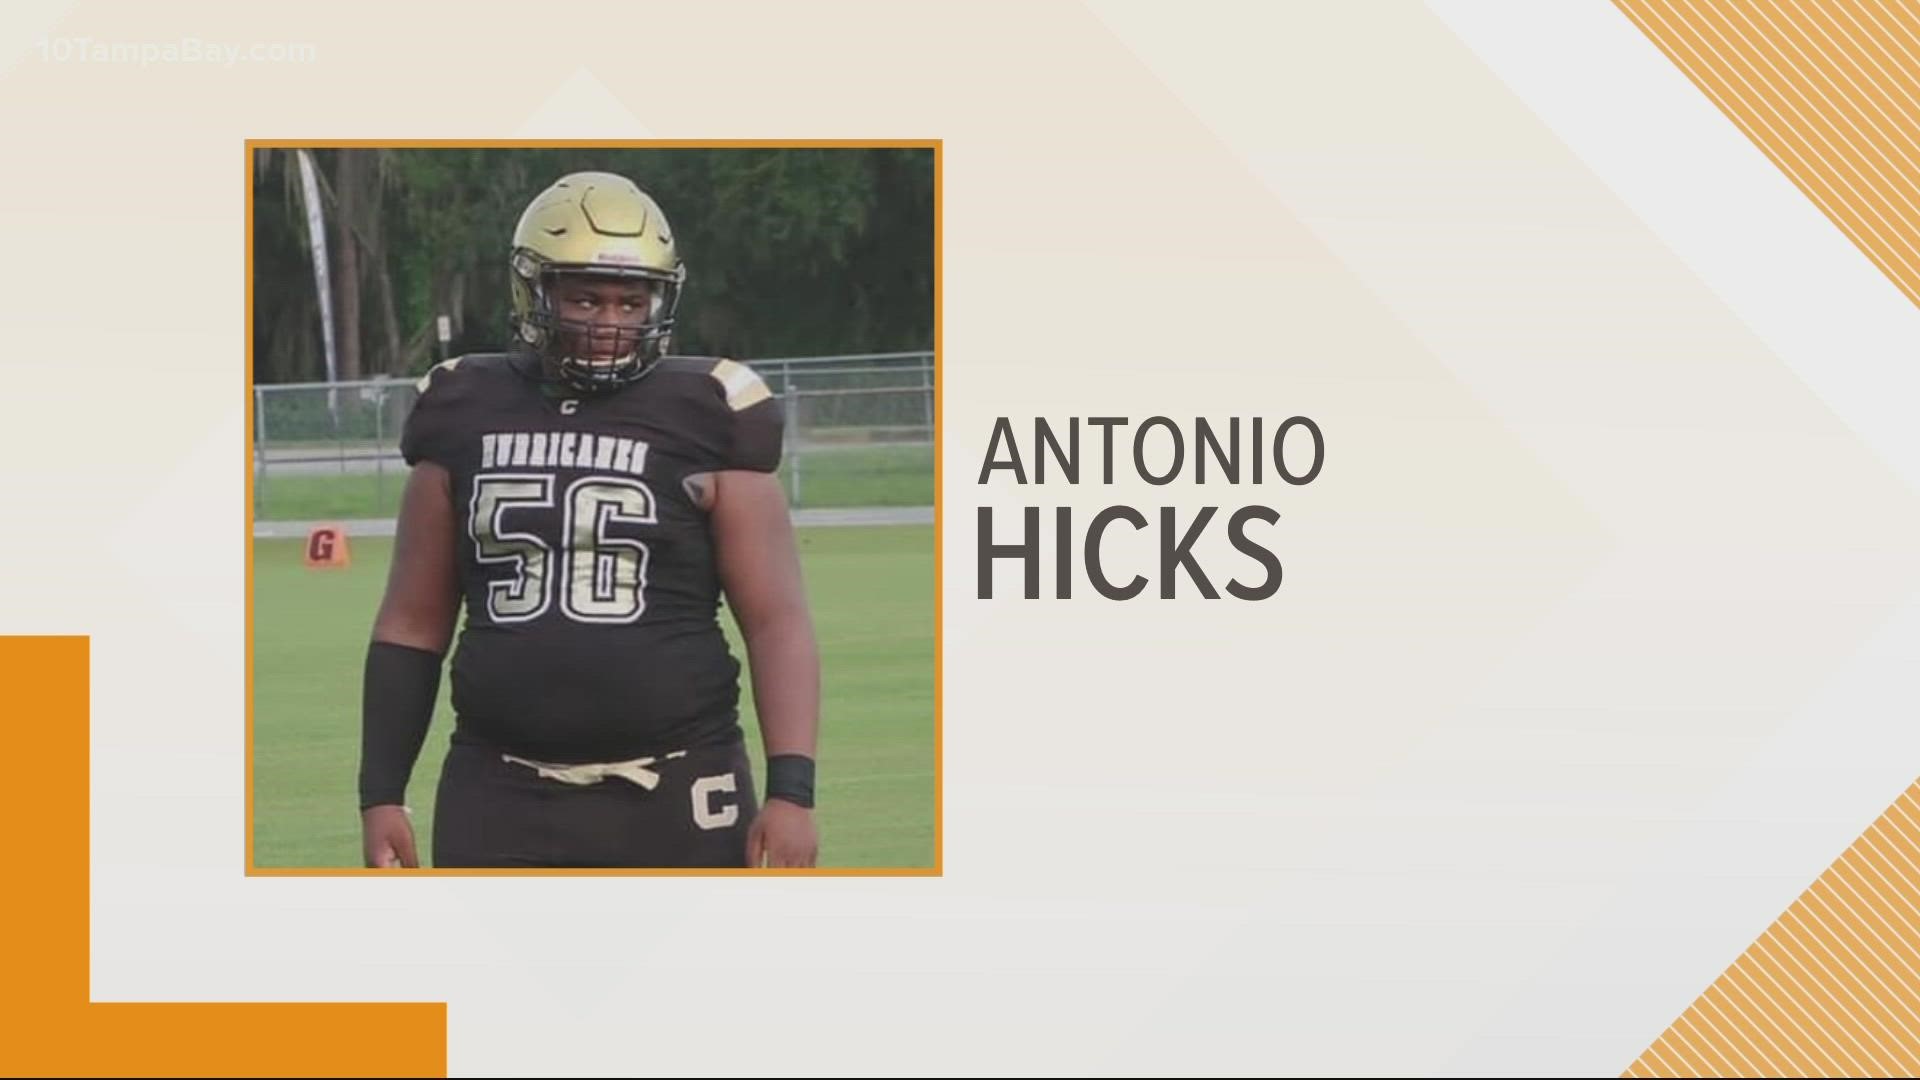 Antonio Hicks, 16, was remembered as a football star who died too soon.